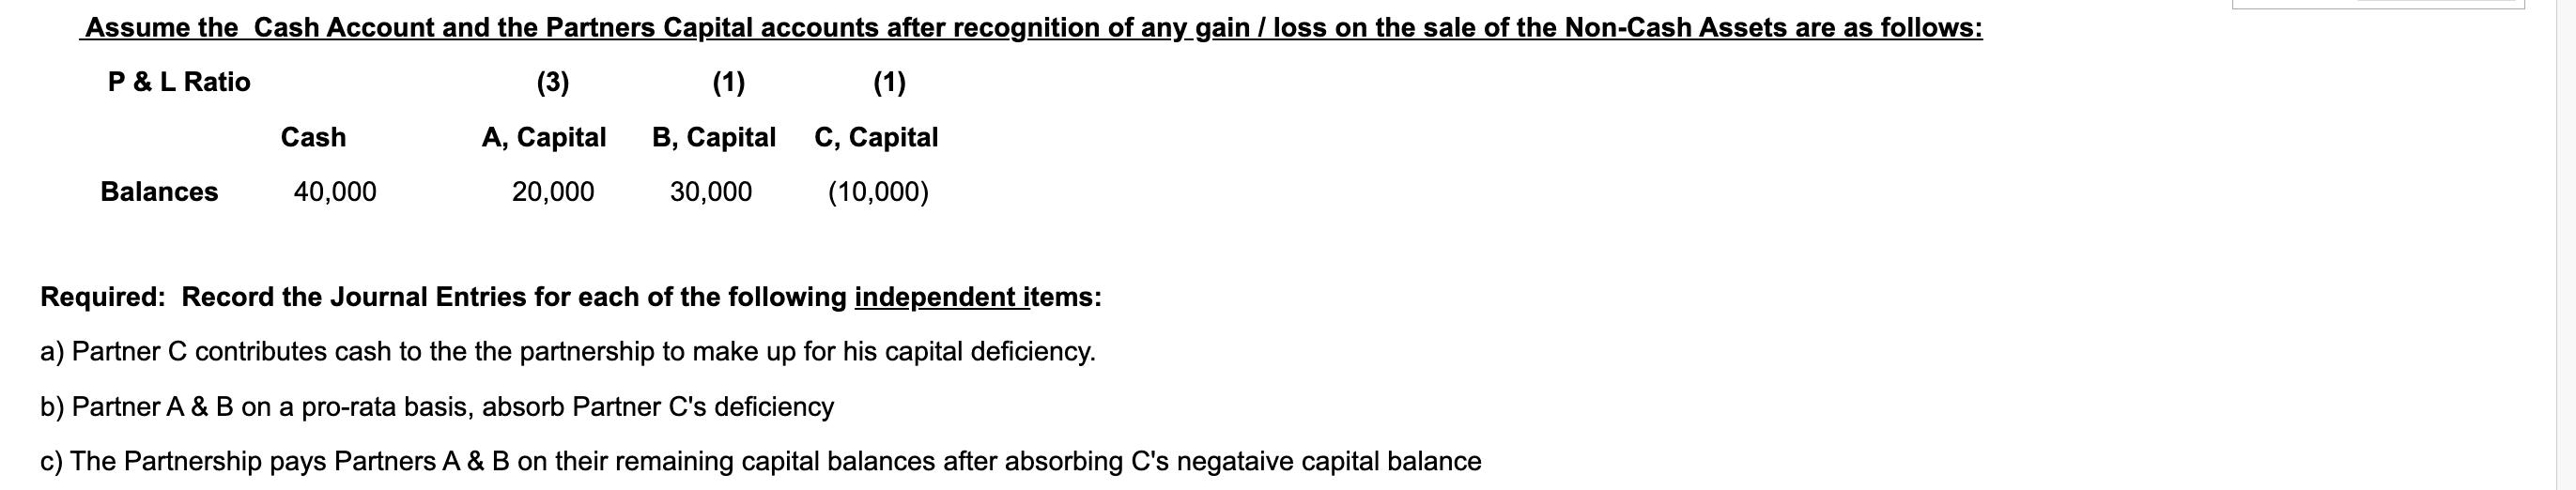 Assume the Cash Account and the Partners Capital accounts after recognition of any gain / loss on the sale of